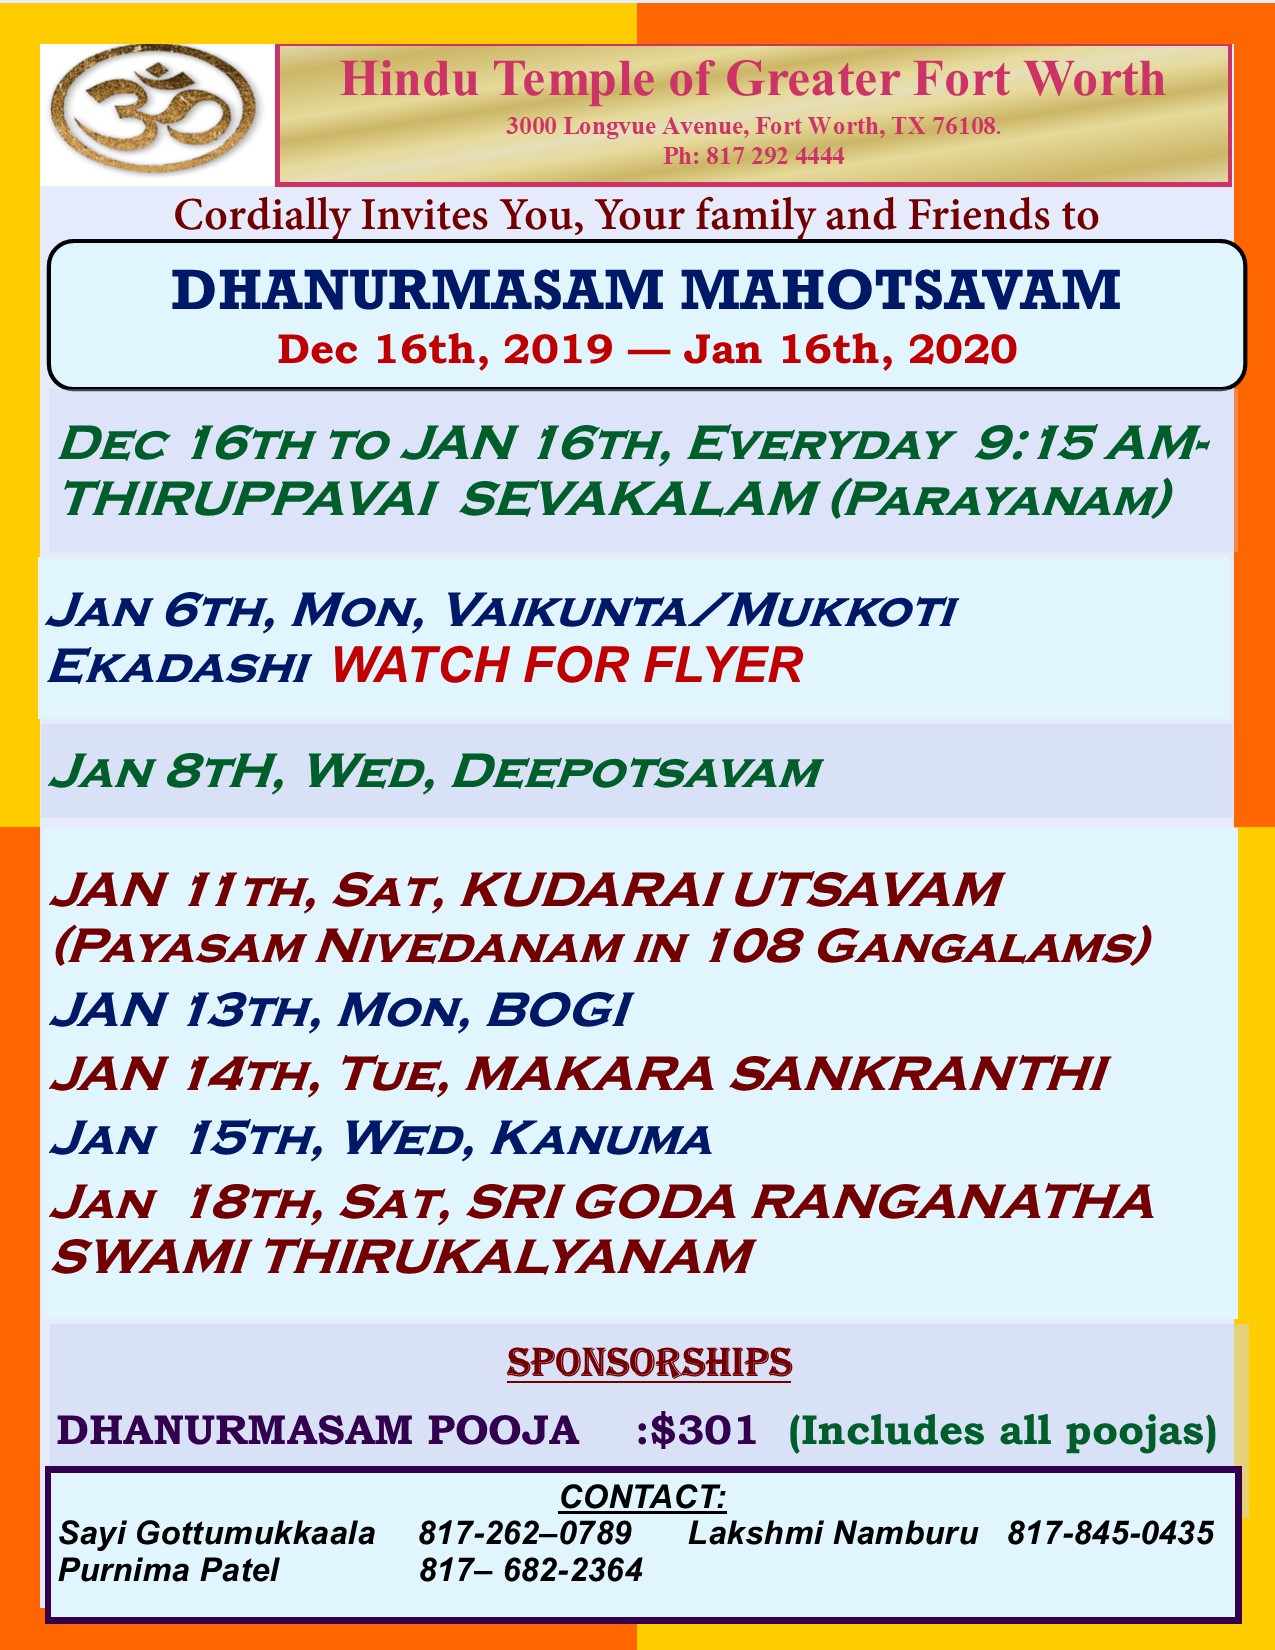 Dhanurmasam events